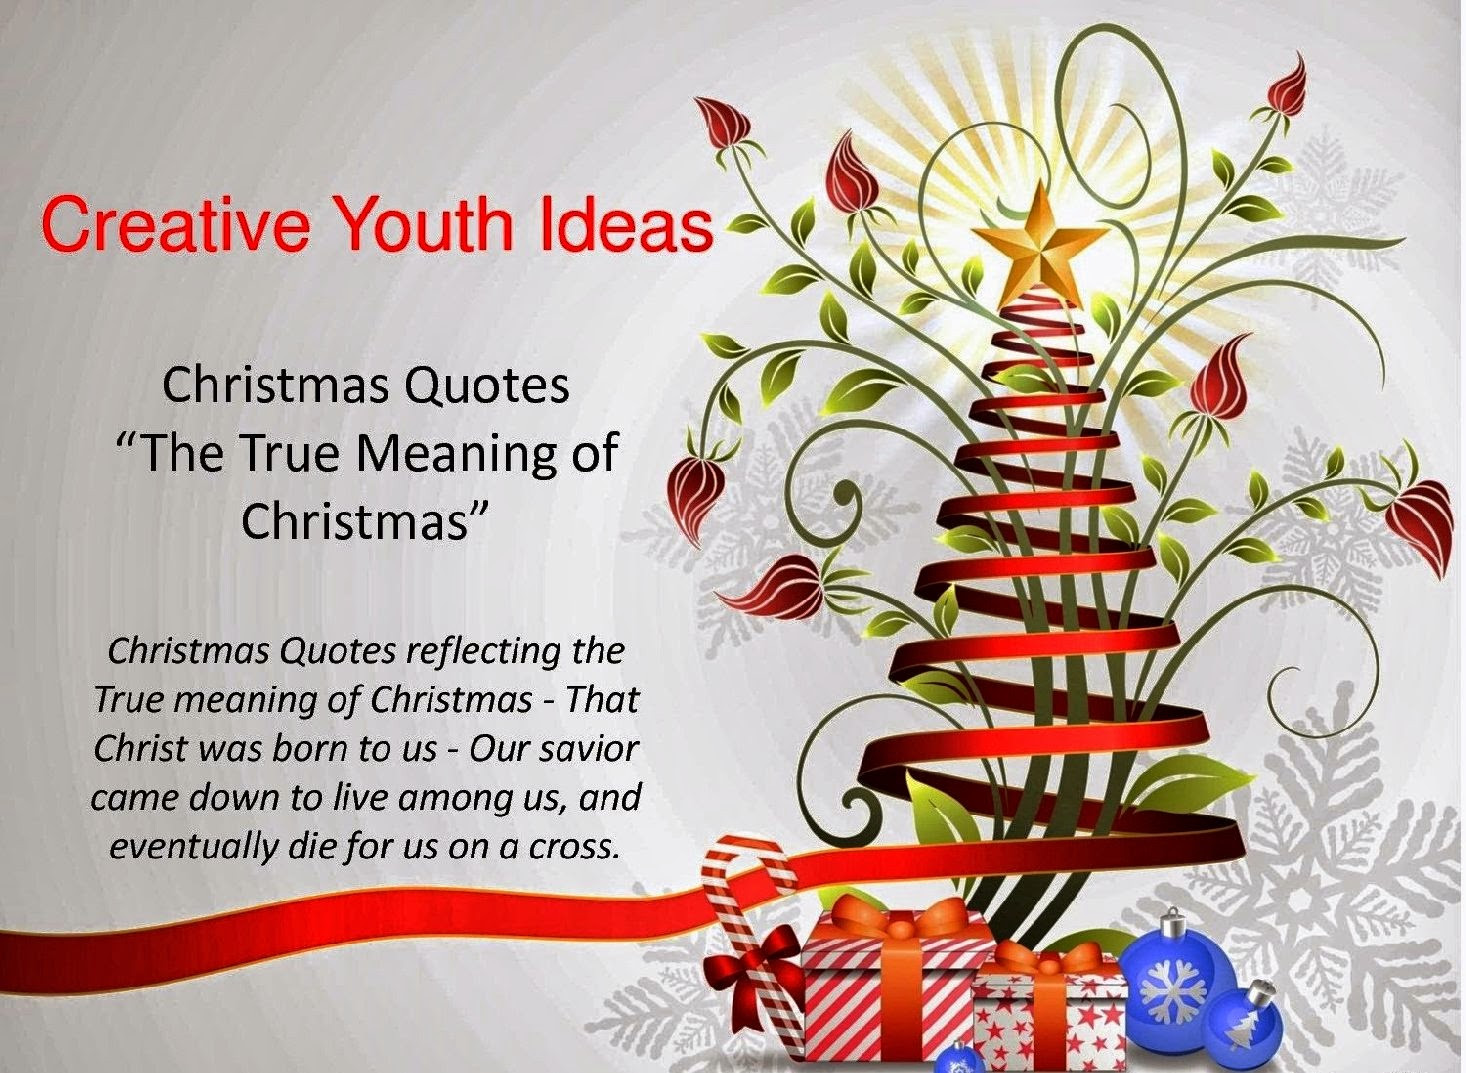 Christmas One Line Quotes
 merry Christmas Eve quotes wishes cards photos This Blog